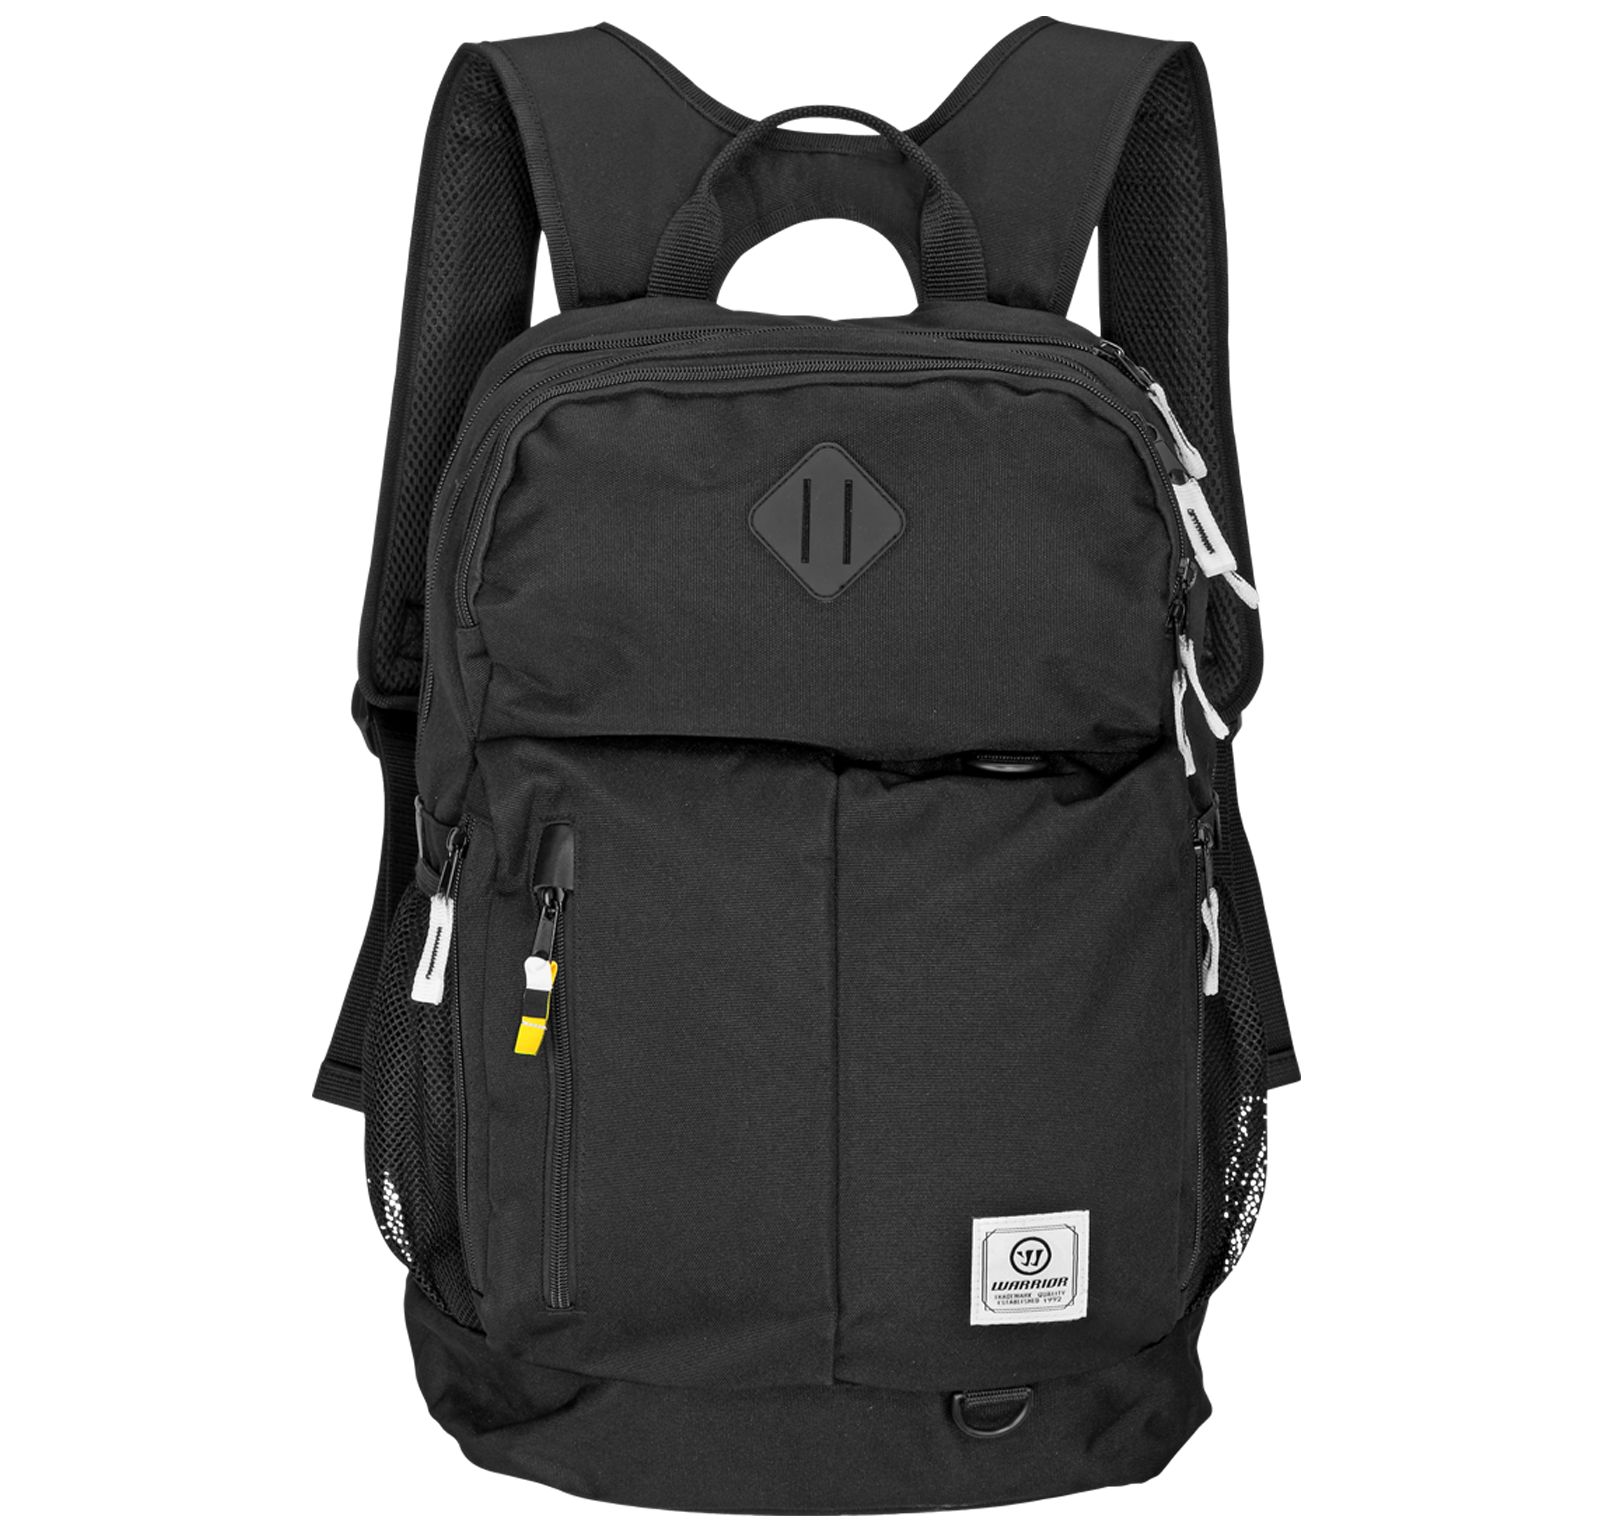 Q10 Day Backpack